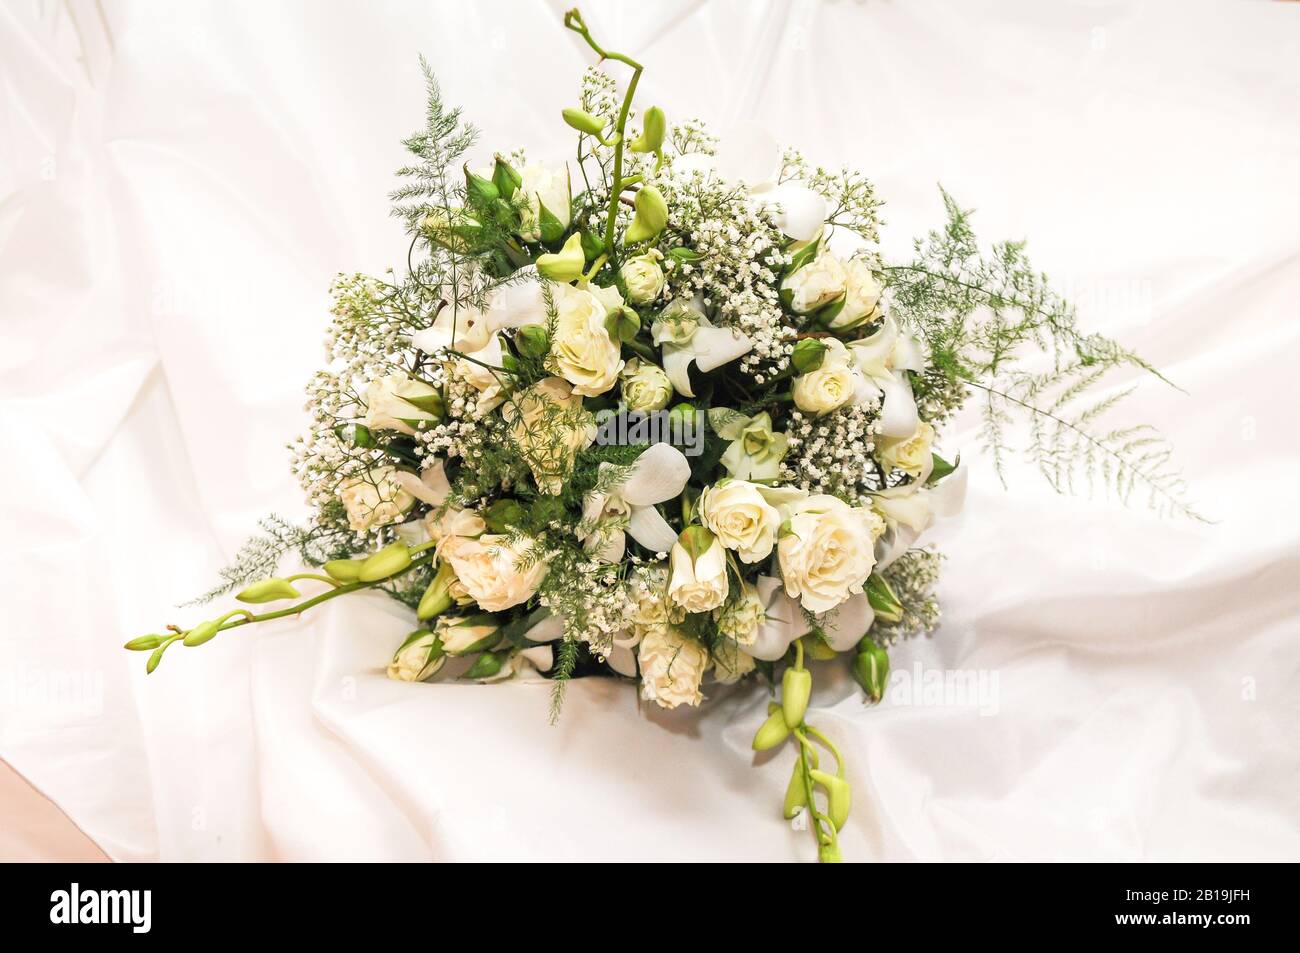 Beautiful wedding bouquet with white flowers. Stock Photo